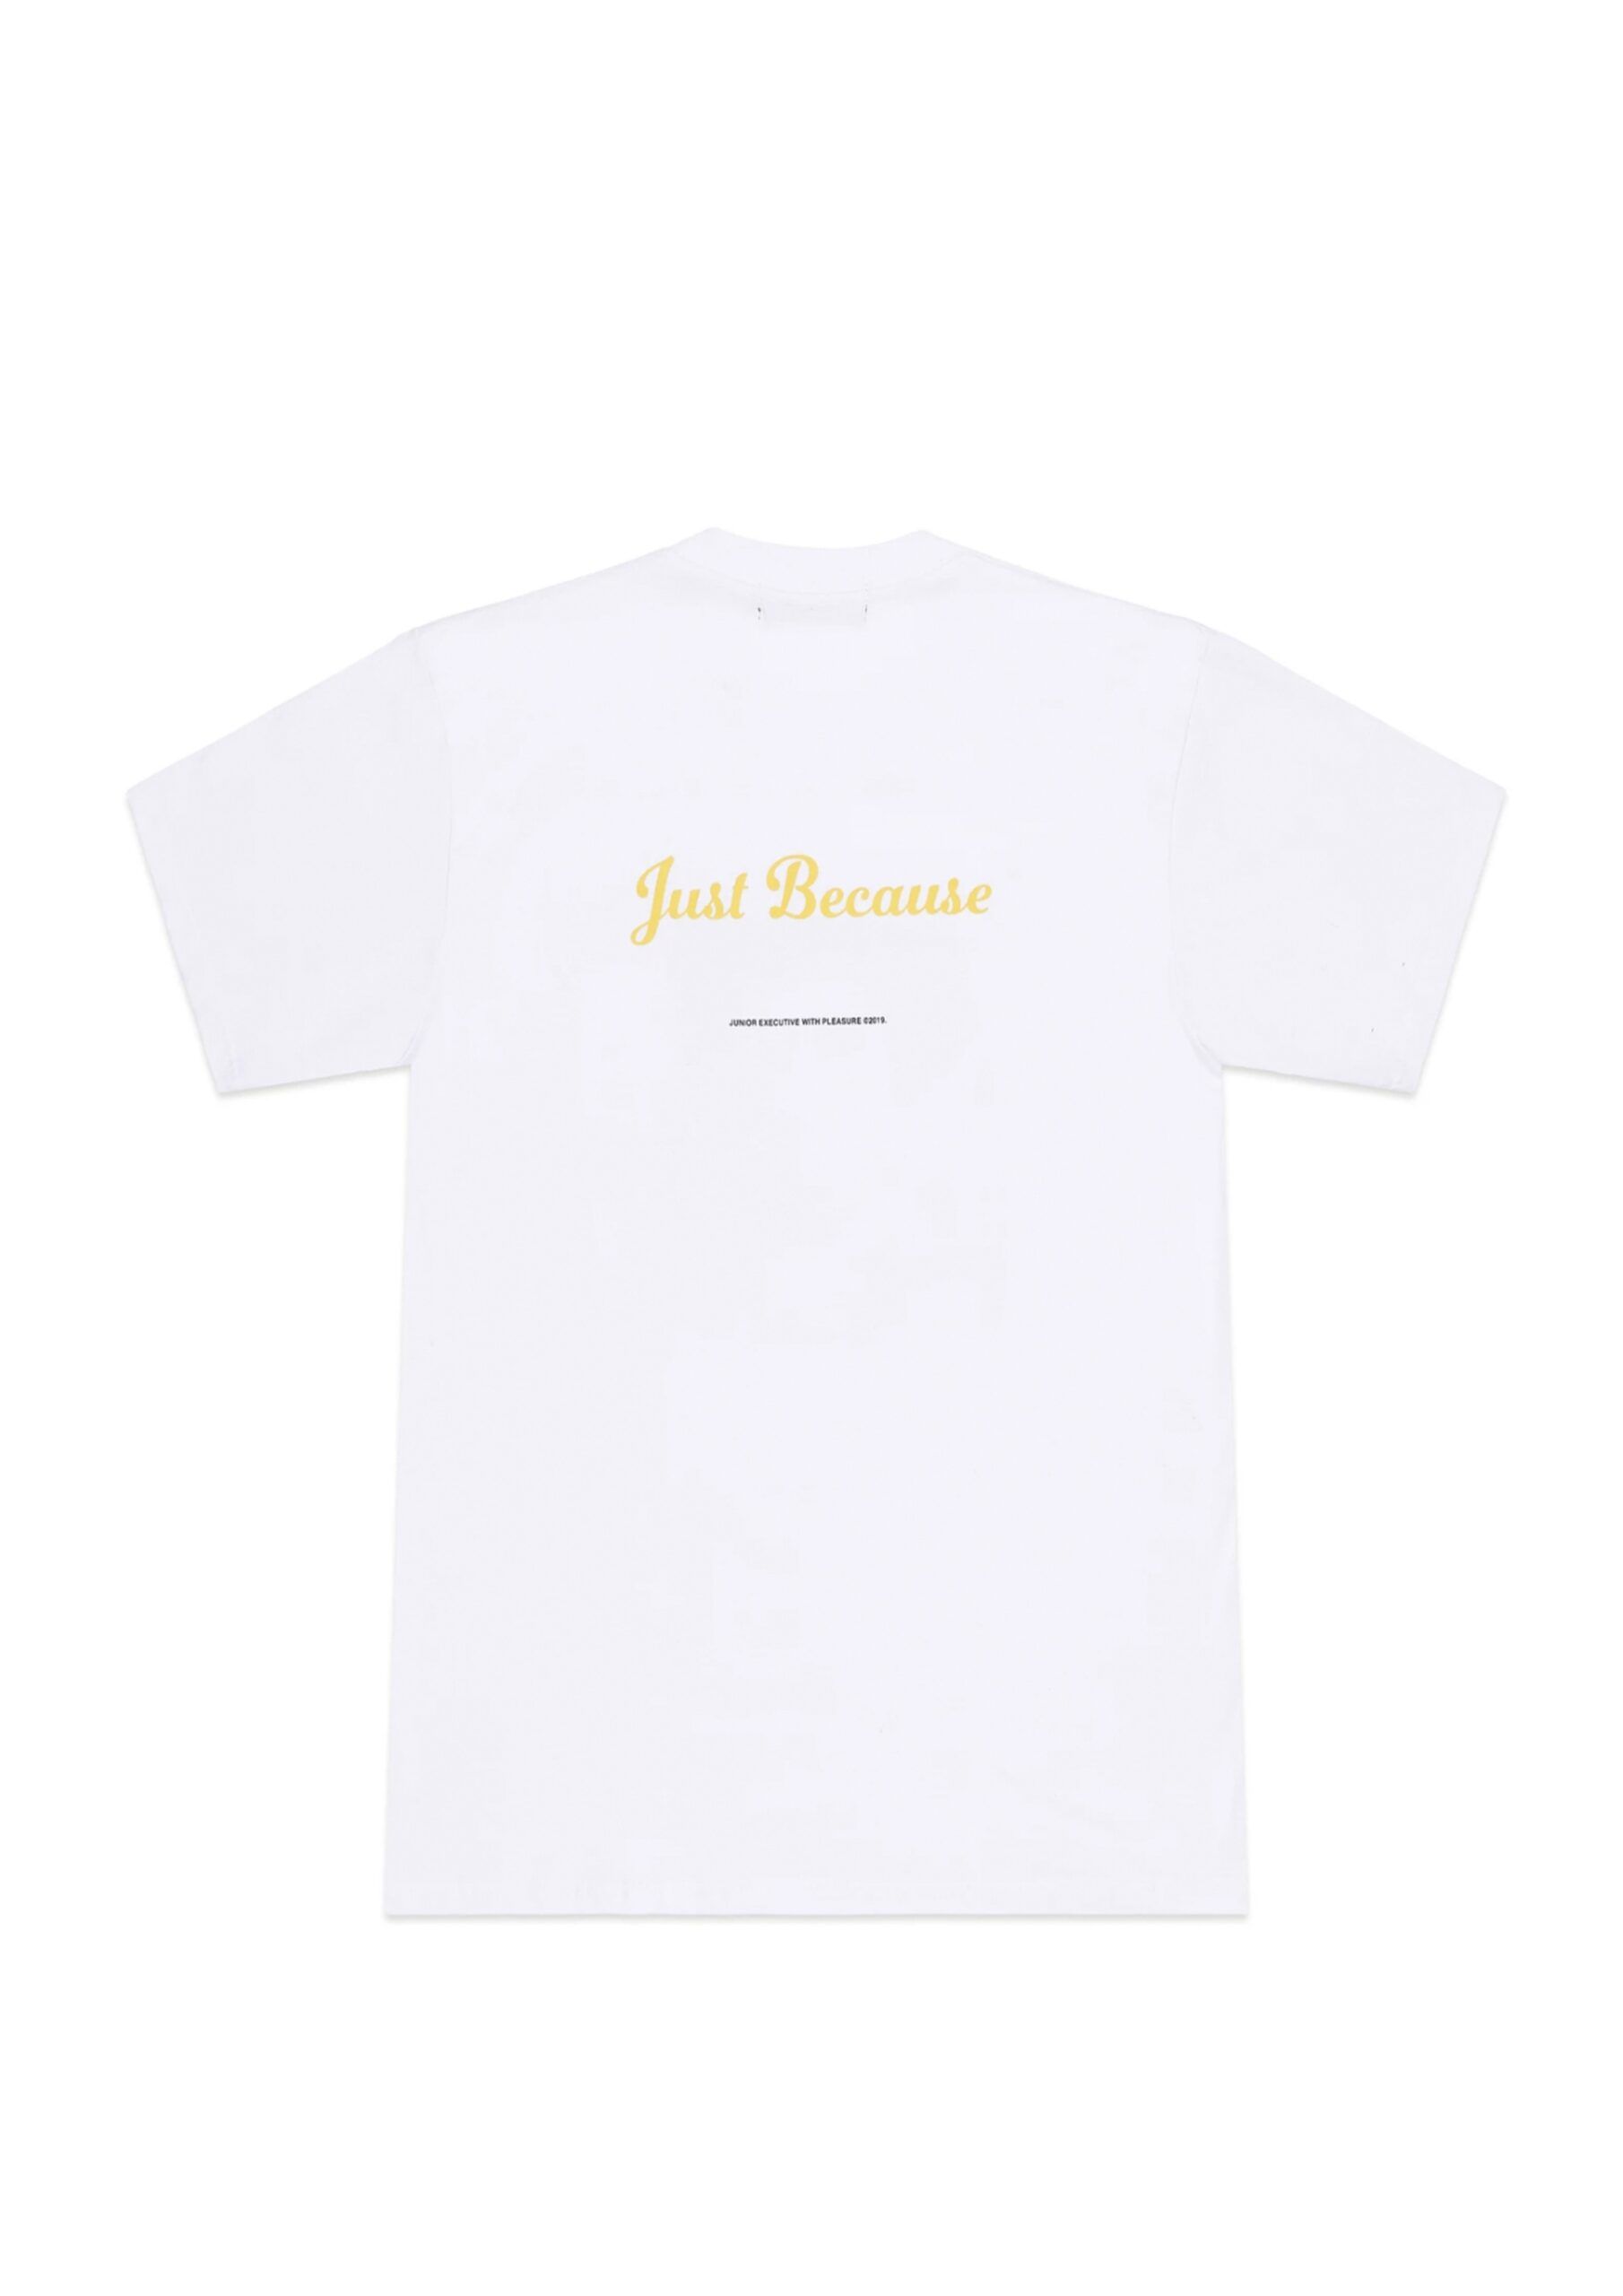 JUNIOR EXECUTIVE WITH PLEASURE JUST BECAUSE TEE